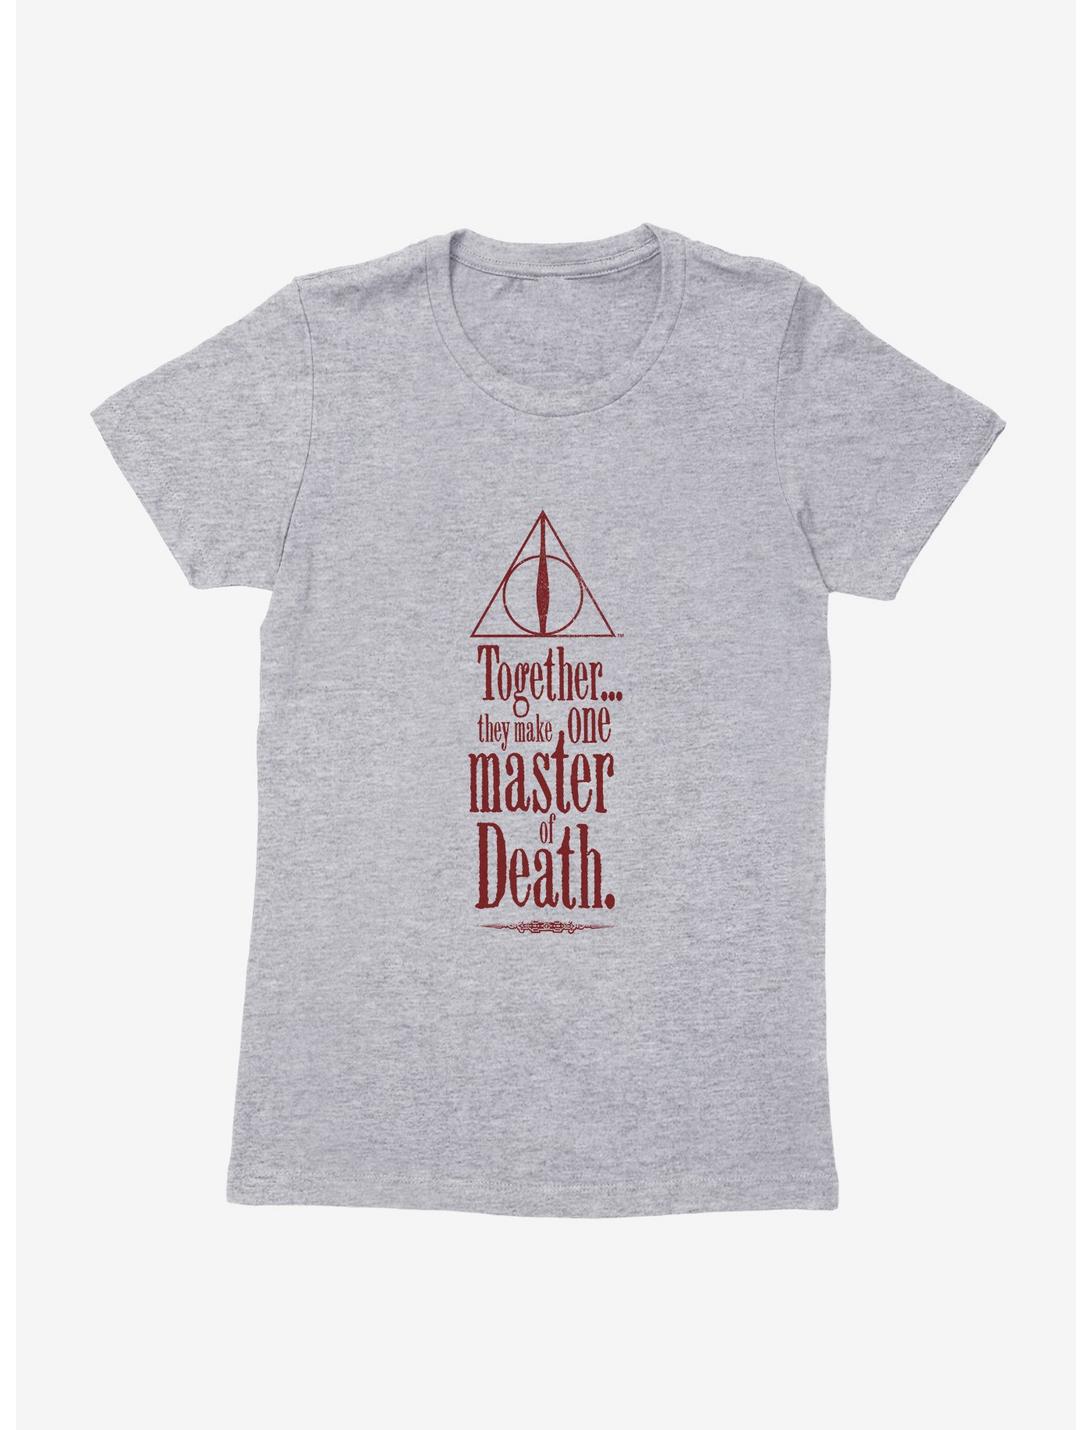 Harry Potter Deathly Hallows Master Of Death Womens T-Shirt, HEATHER GREY, hi-res